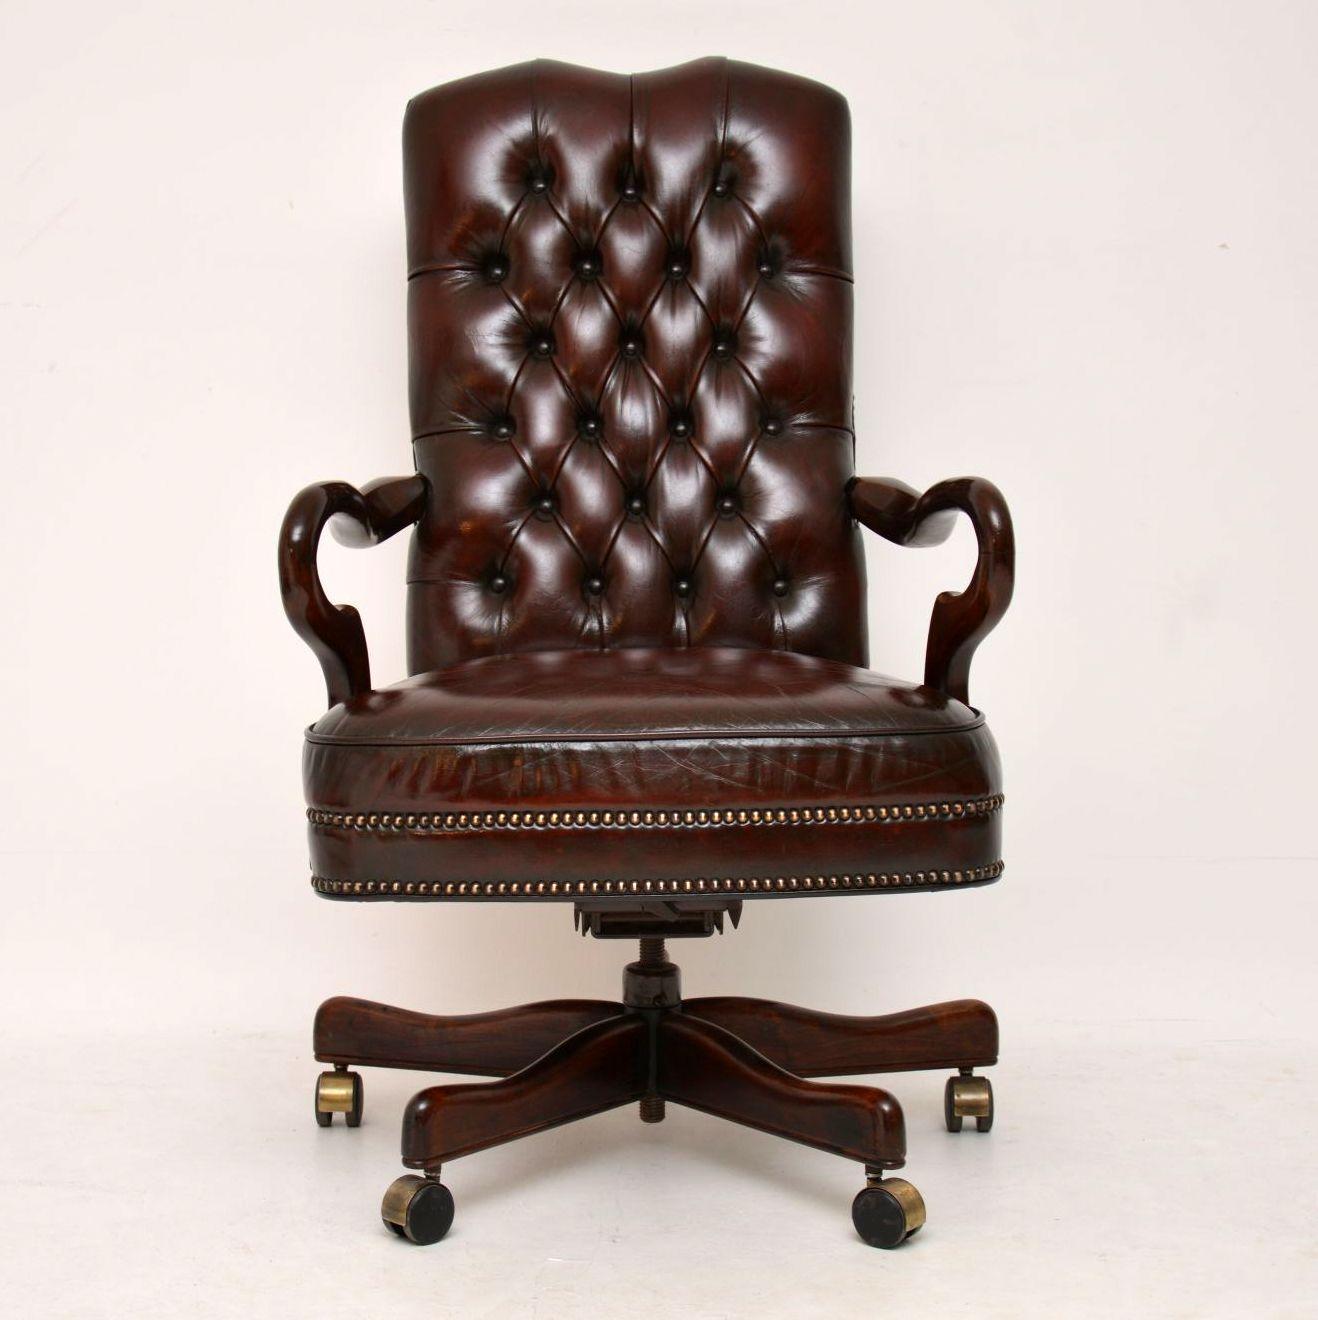 Antique Georgian style deep buttoned swivel desk chair which also tilts back. The leather has just been revived & polished by our leather specialist & is in good condition with plenty of character. This chair has a high back & a sprung seat, so is